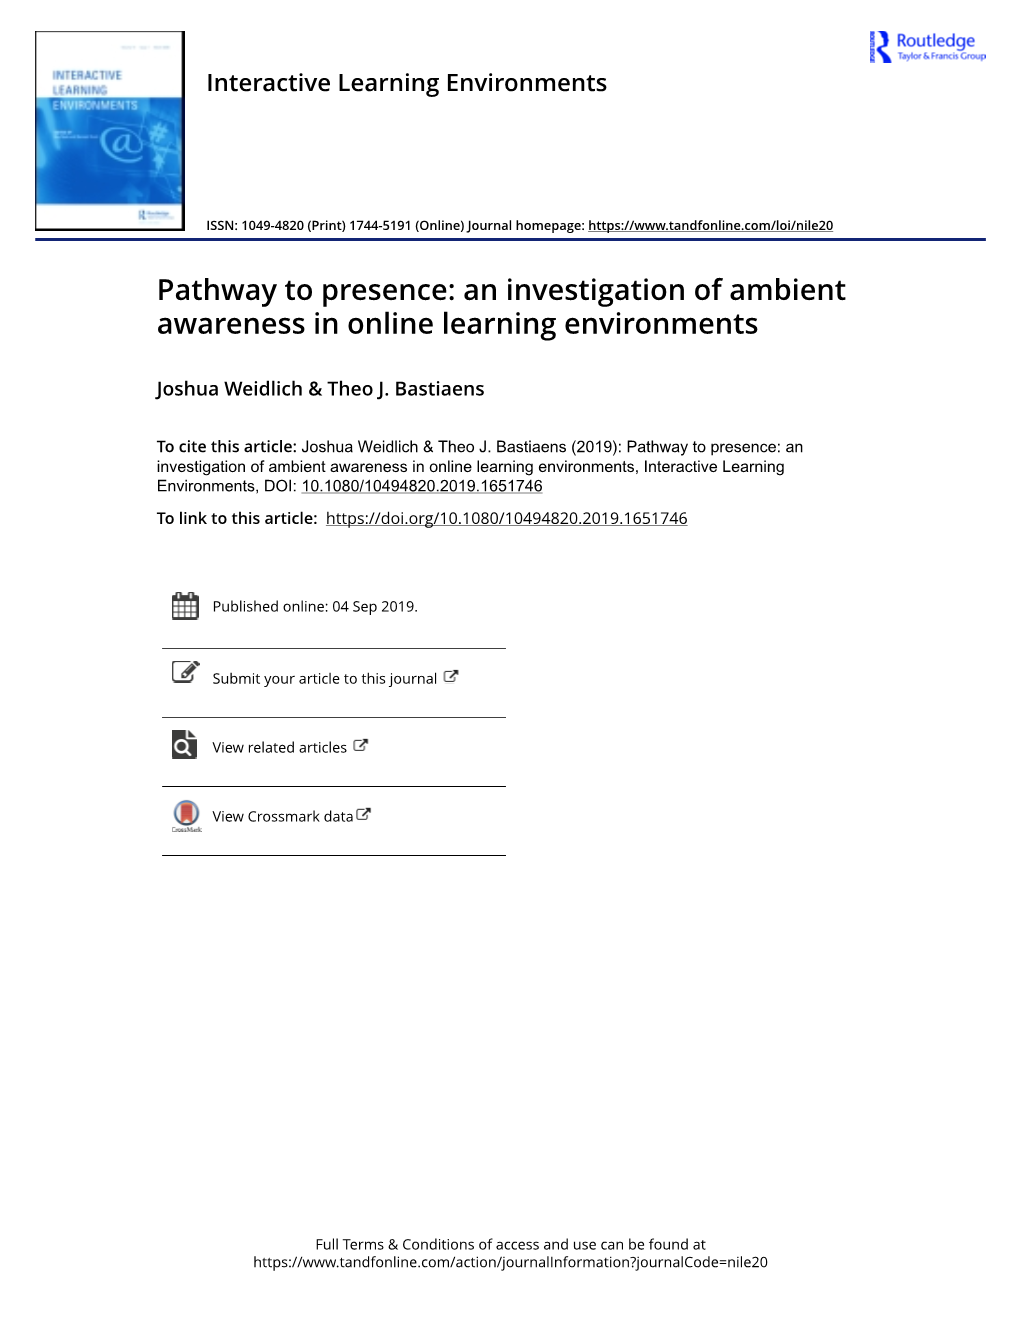 An Investigation of Ambient Awareness in Online Learning Environments